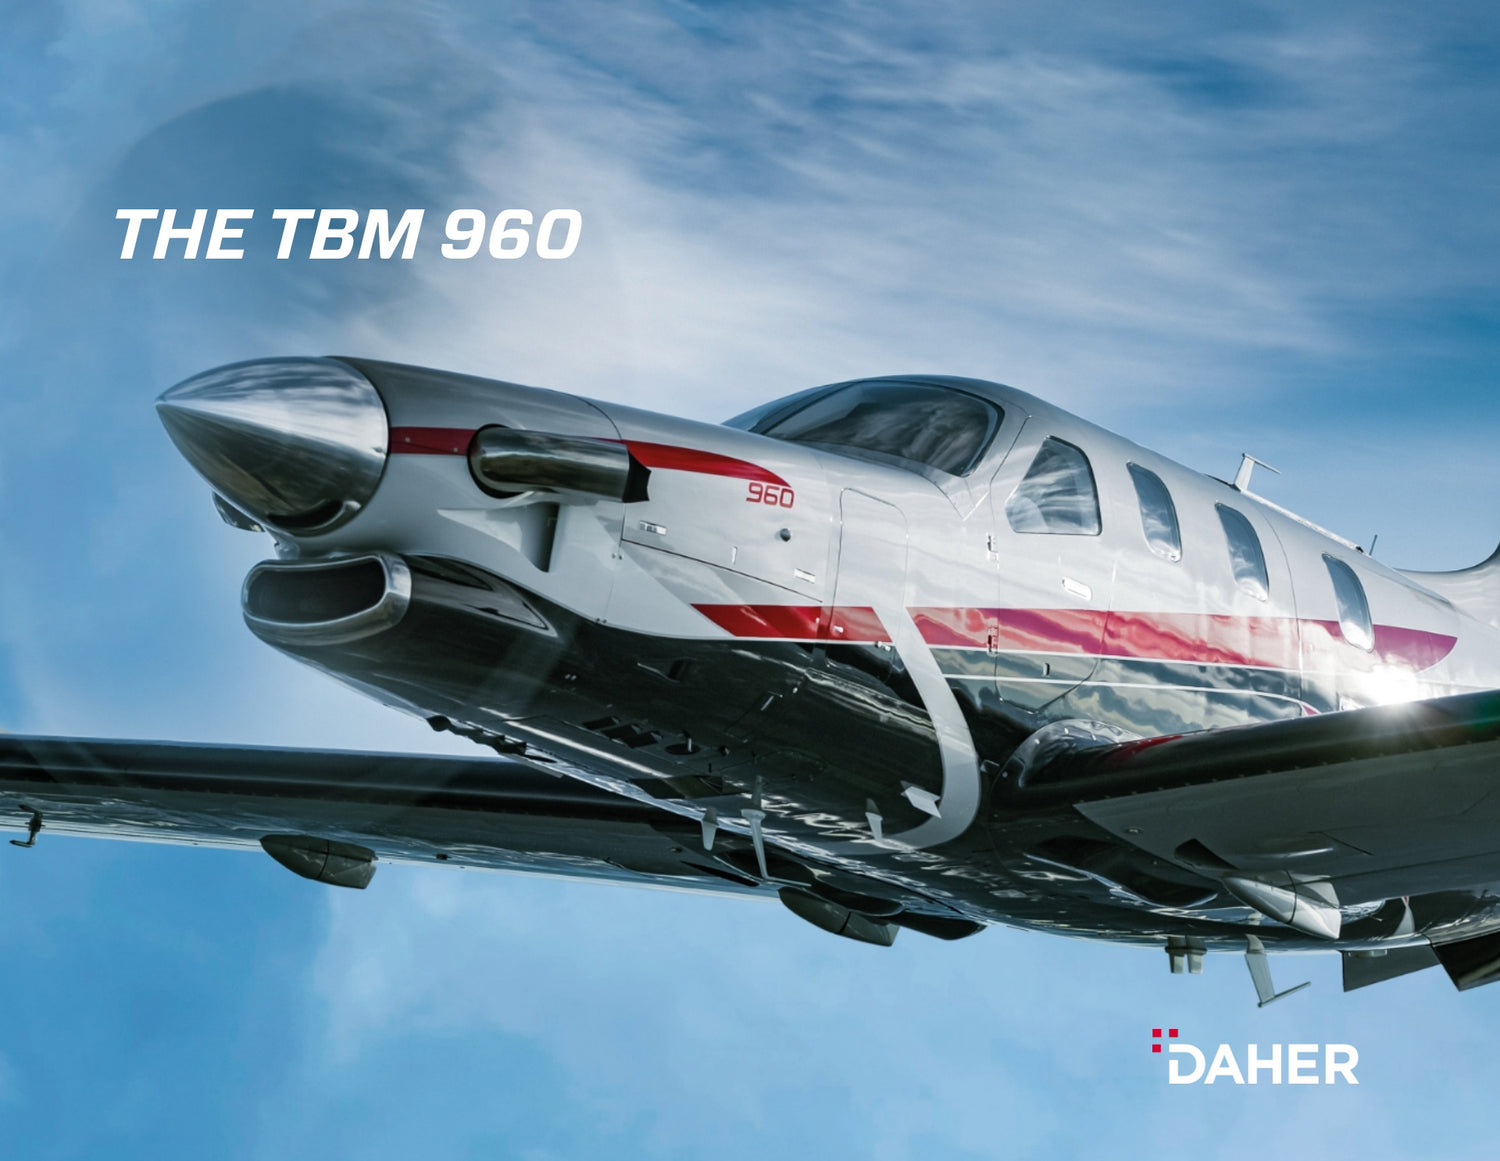 The tbm 550 is flying in the sky.